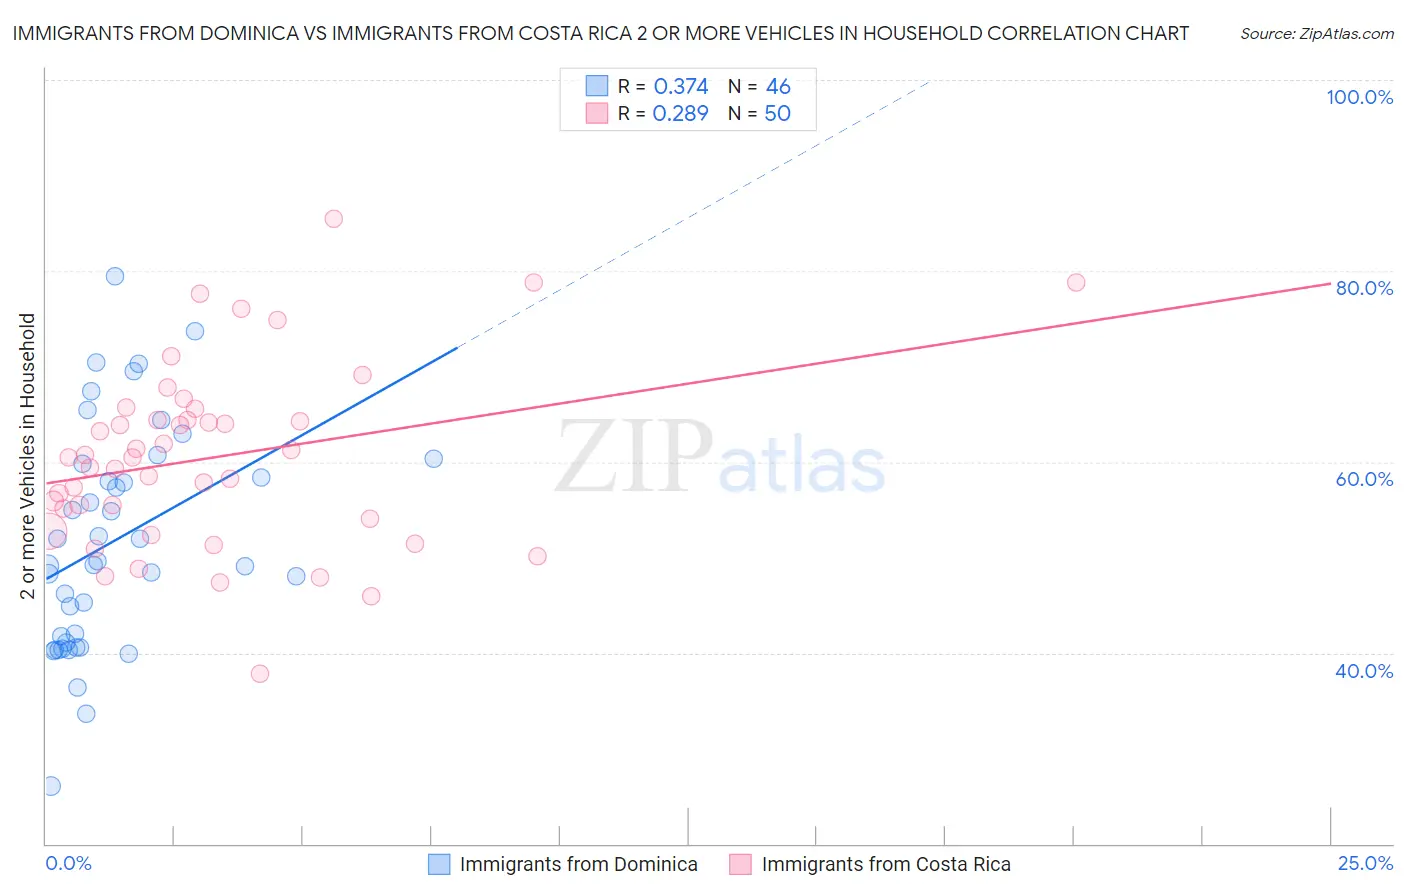 Immigrants from Dominica vs Immigrants from Costa Rica 2 or more Vehicles in Household